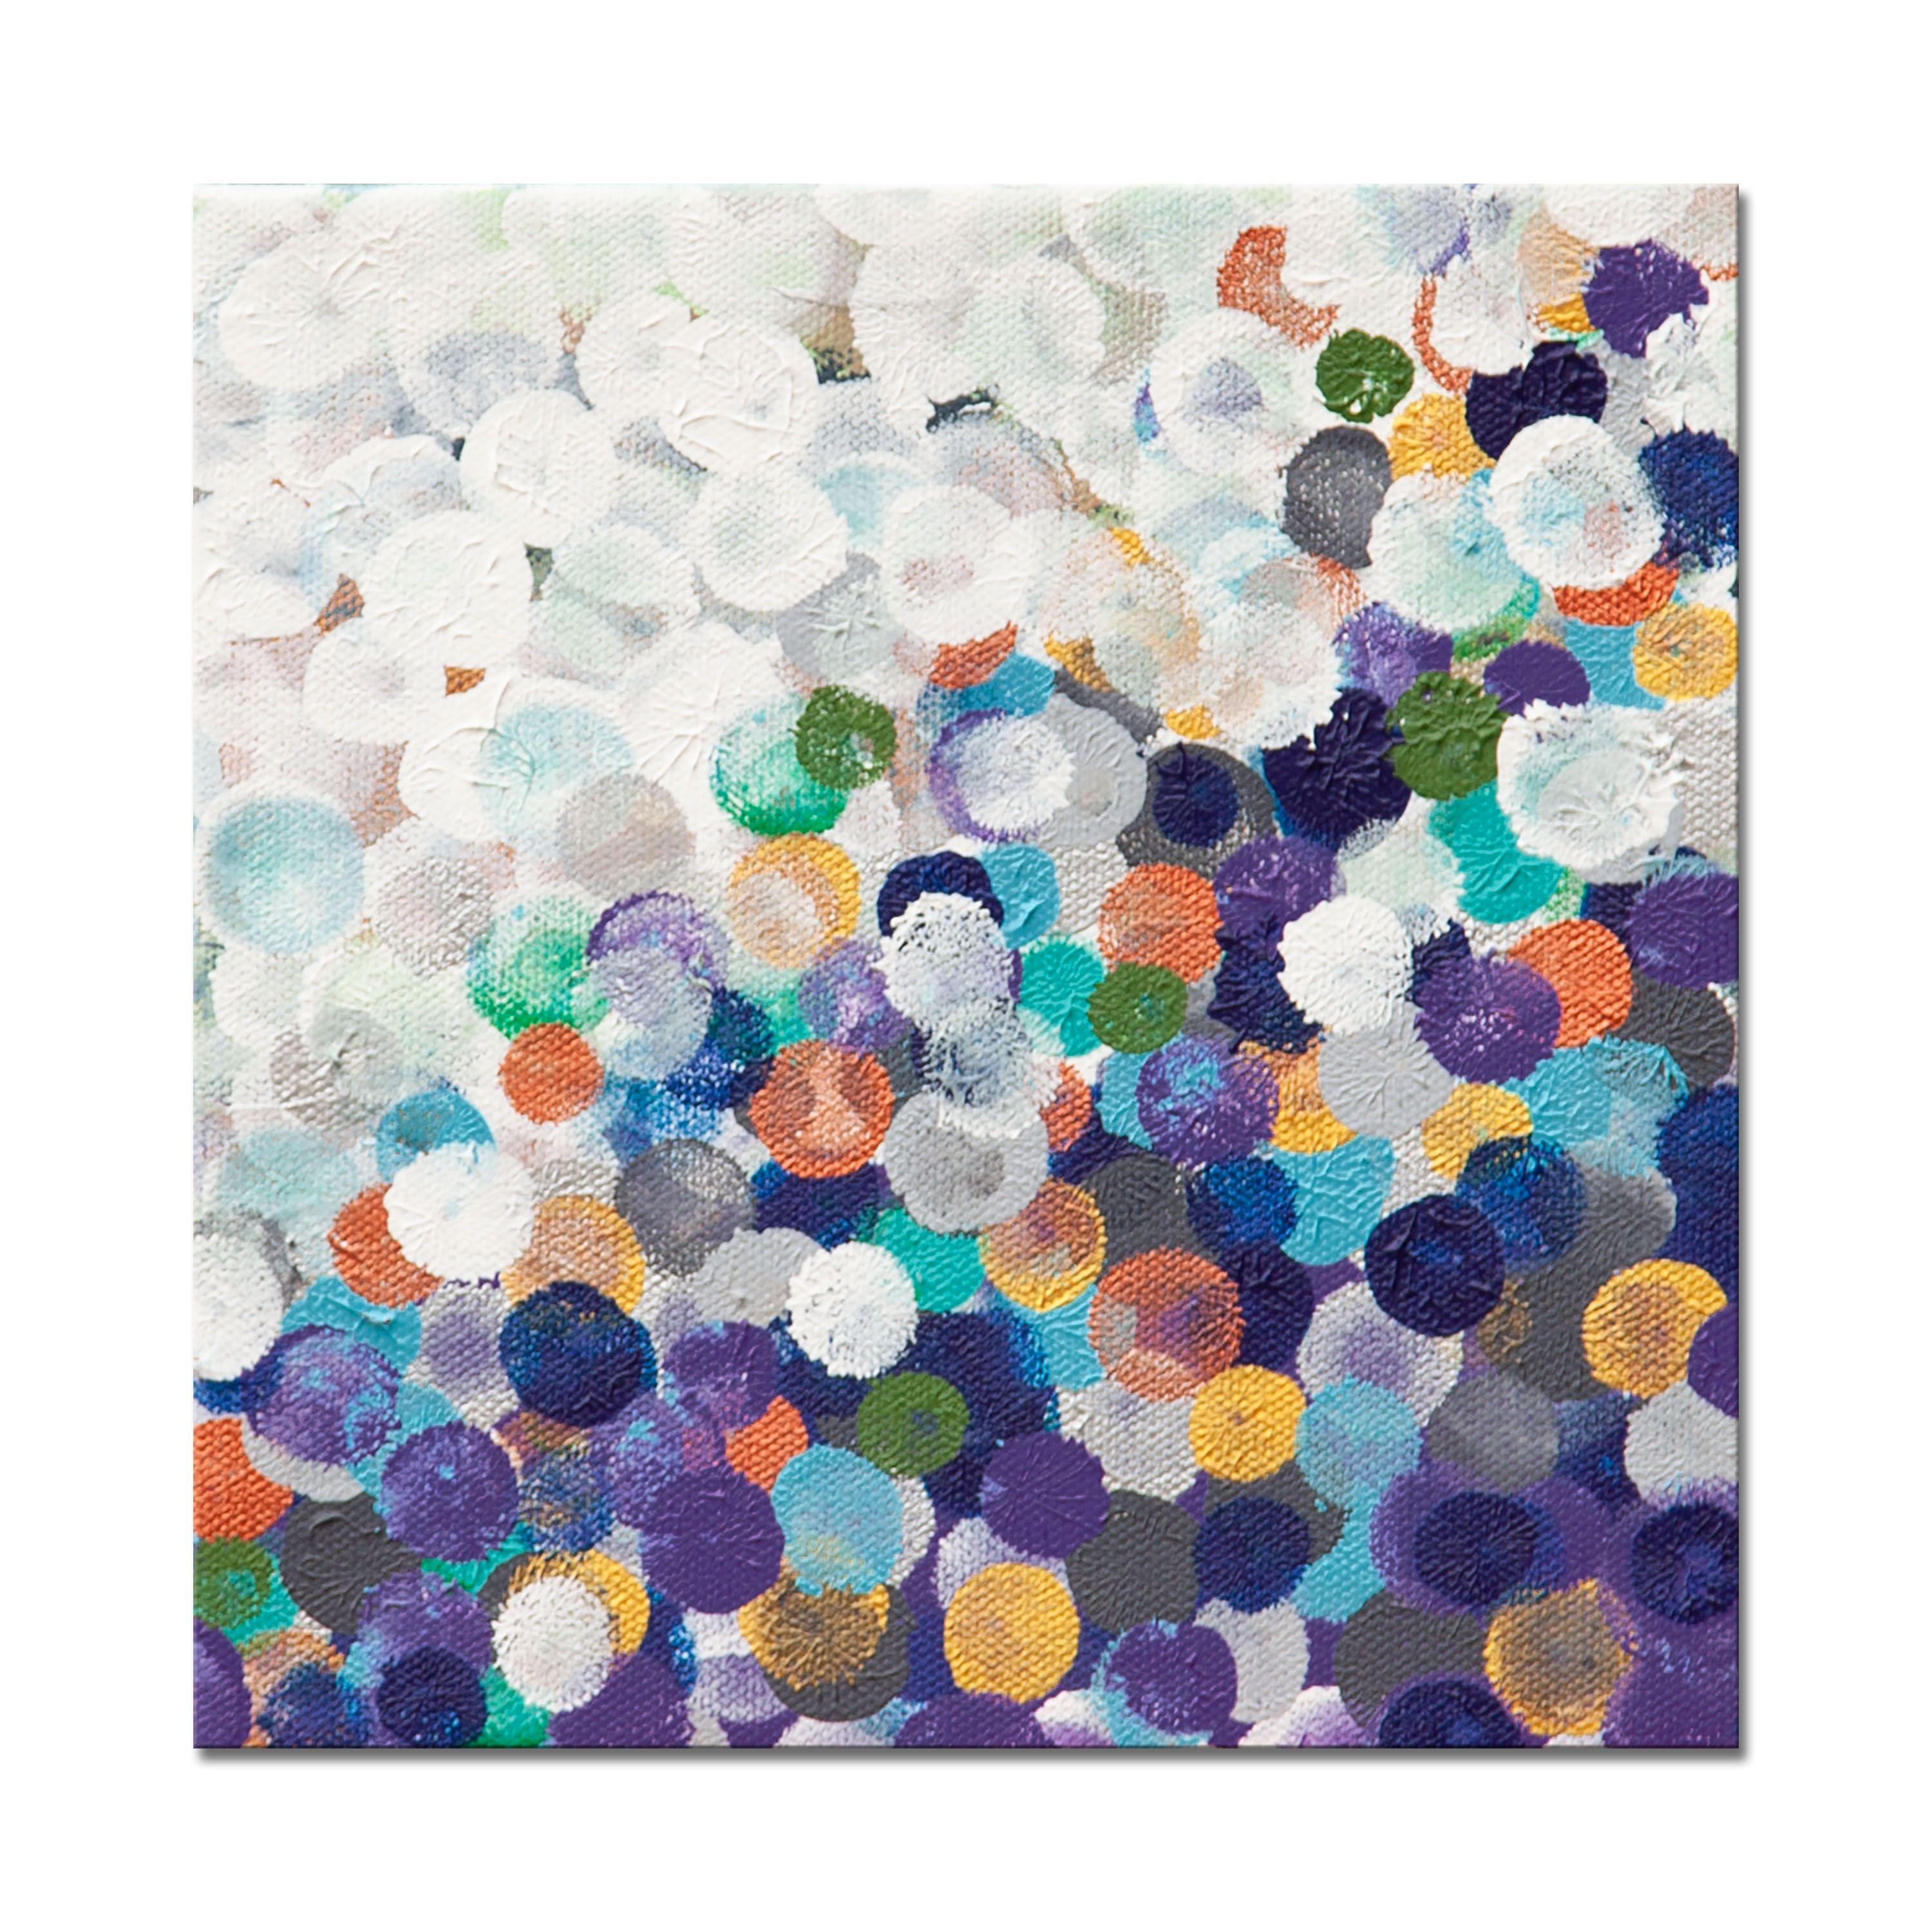 Infinity 2 is an original painting, created with acrylic paint on gallery-wrapped canvas. It has a width of 8 inches and a height of 8 inches with a depth of 1.5 inches (8x8x1.5). The colors used in the painting are white, blue, teal, silver, gold,